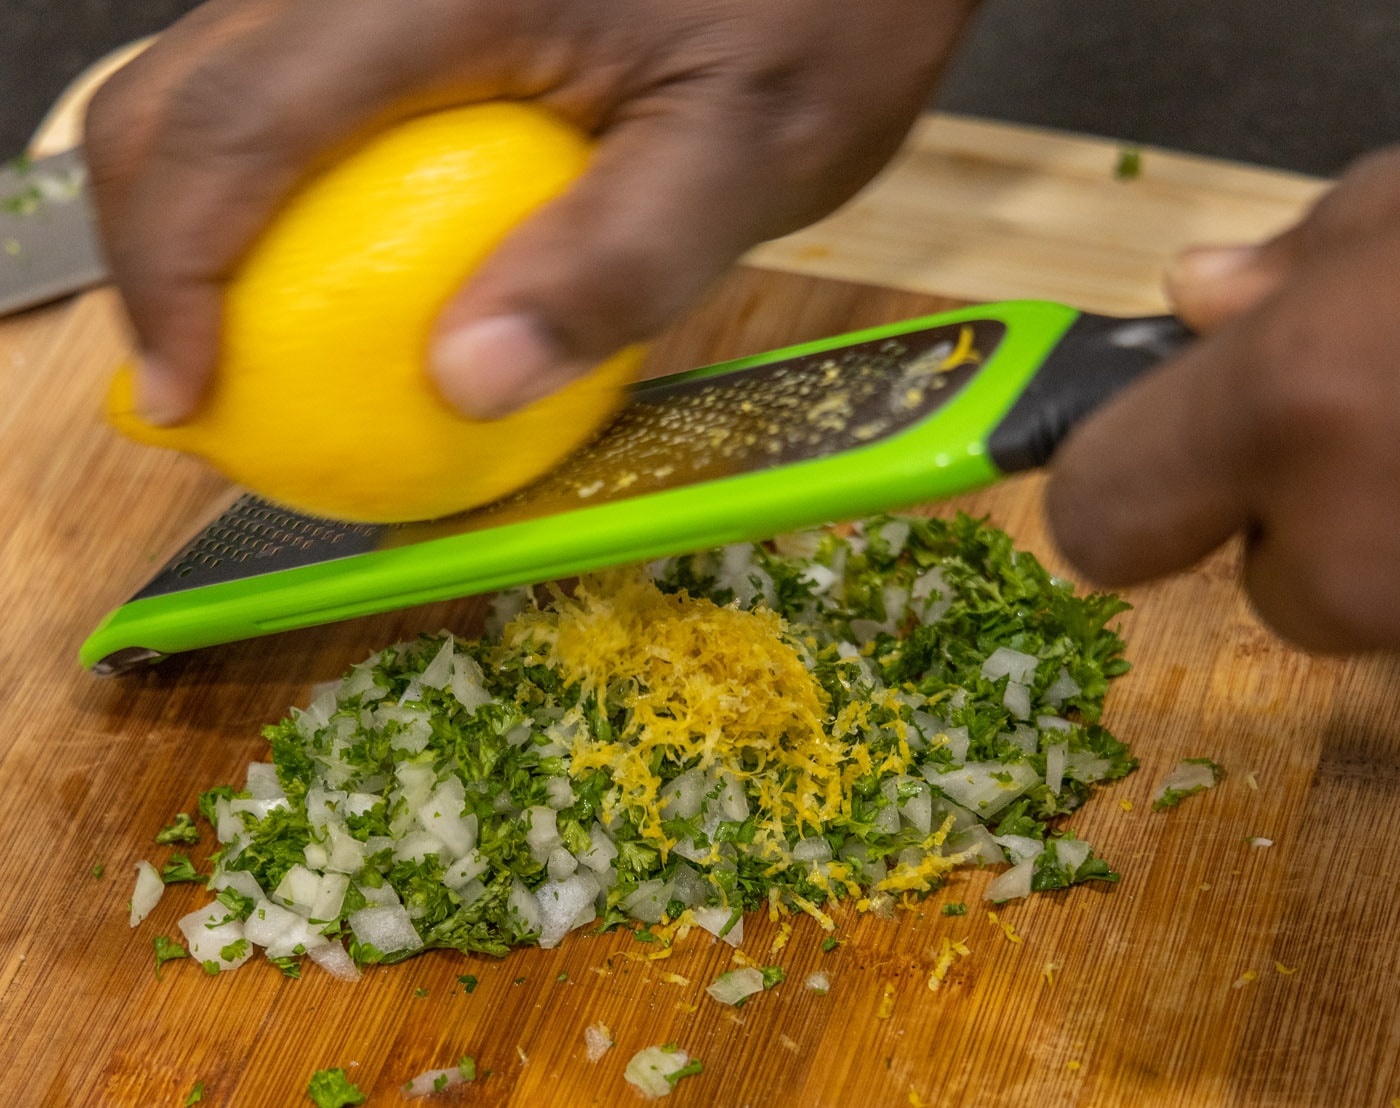 grating lemon over onion and parsley